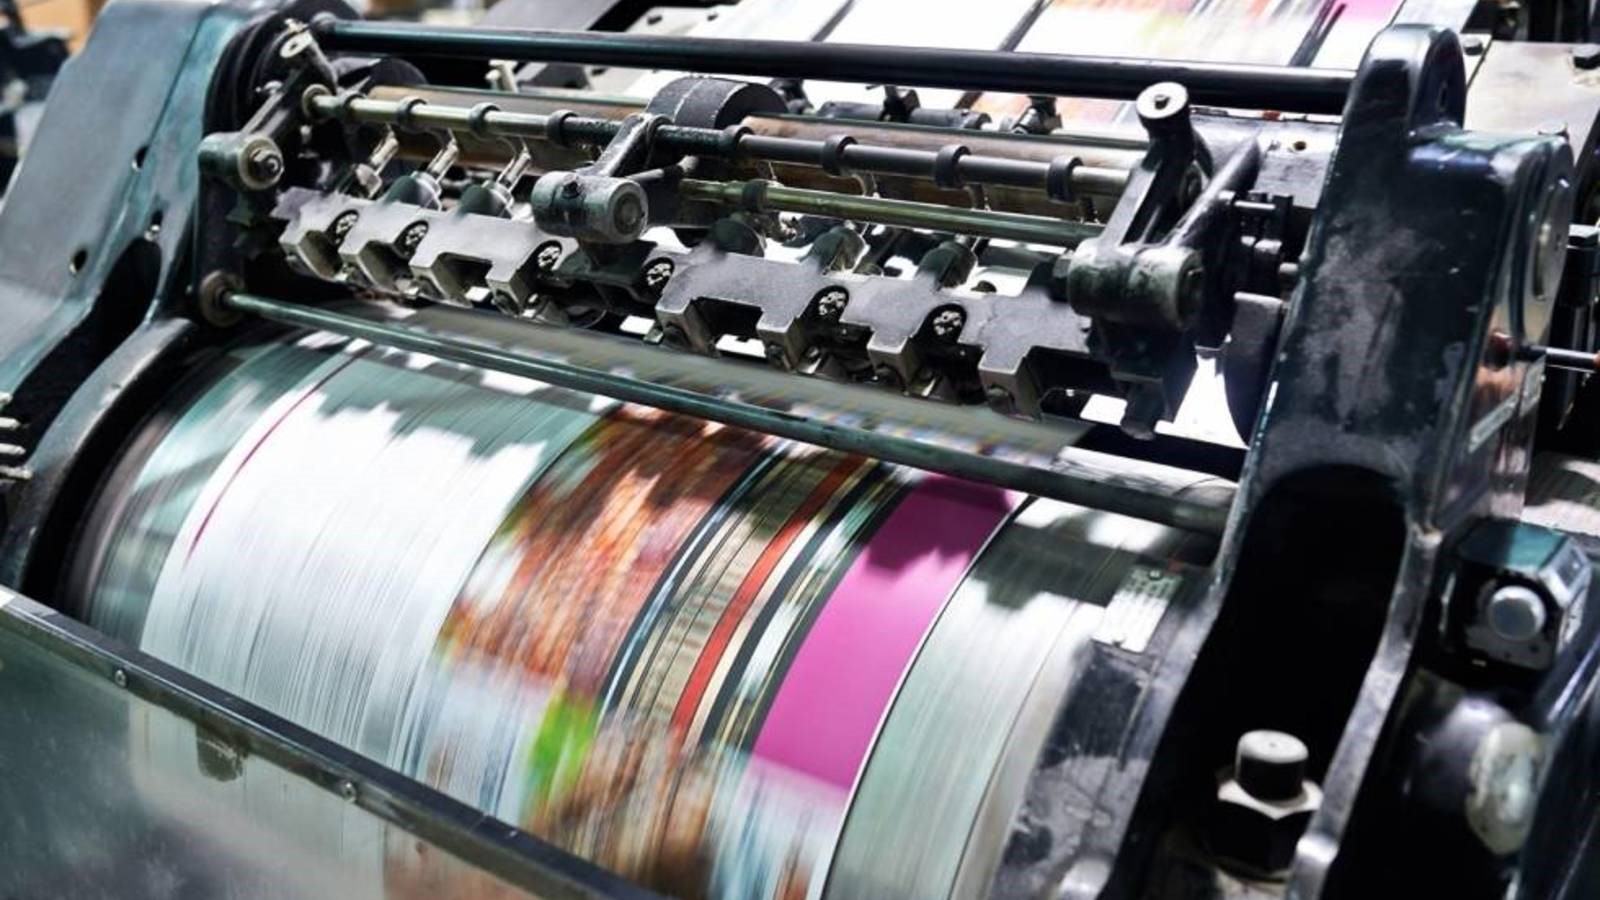 The impact of offset lithography and engraving on printing